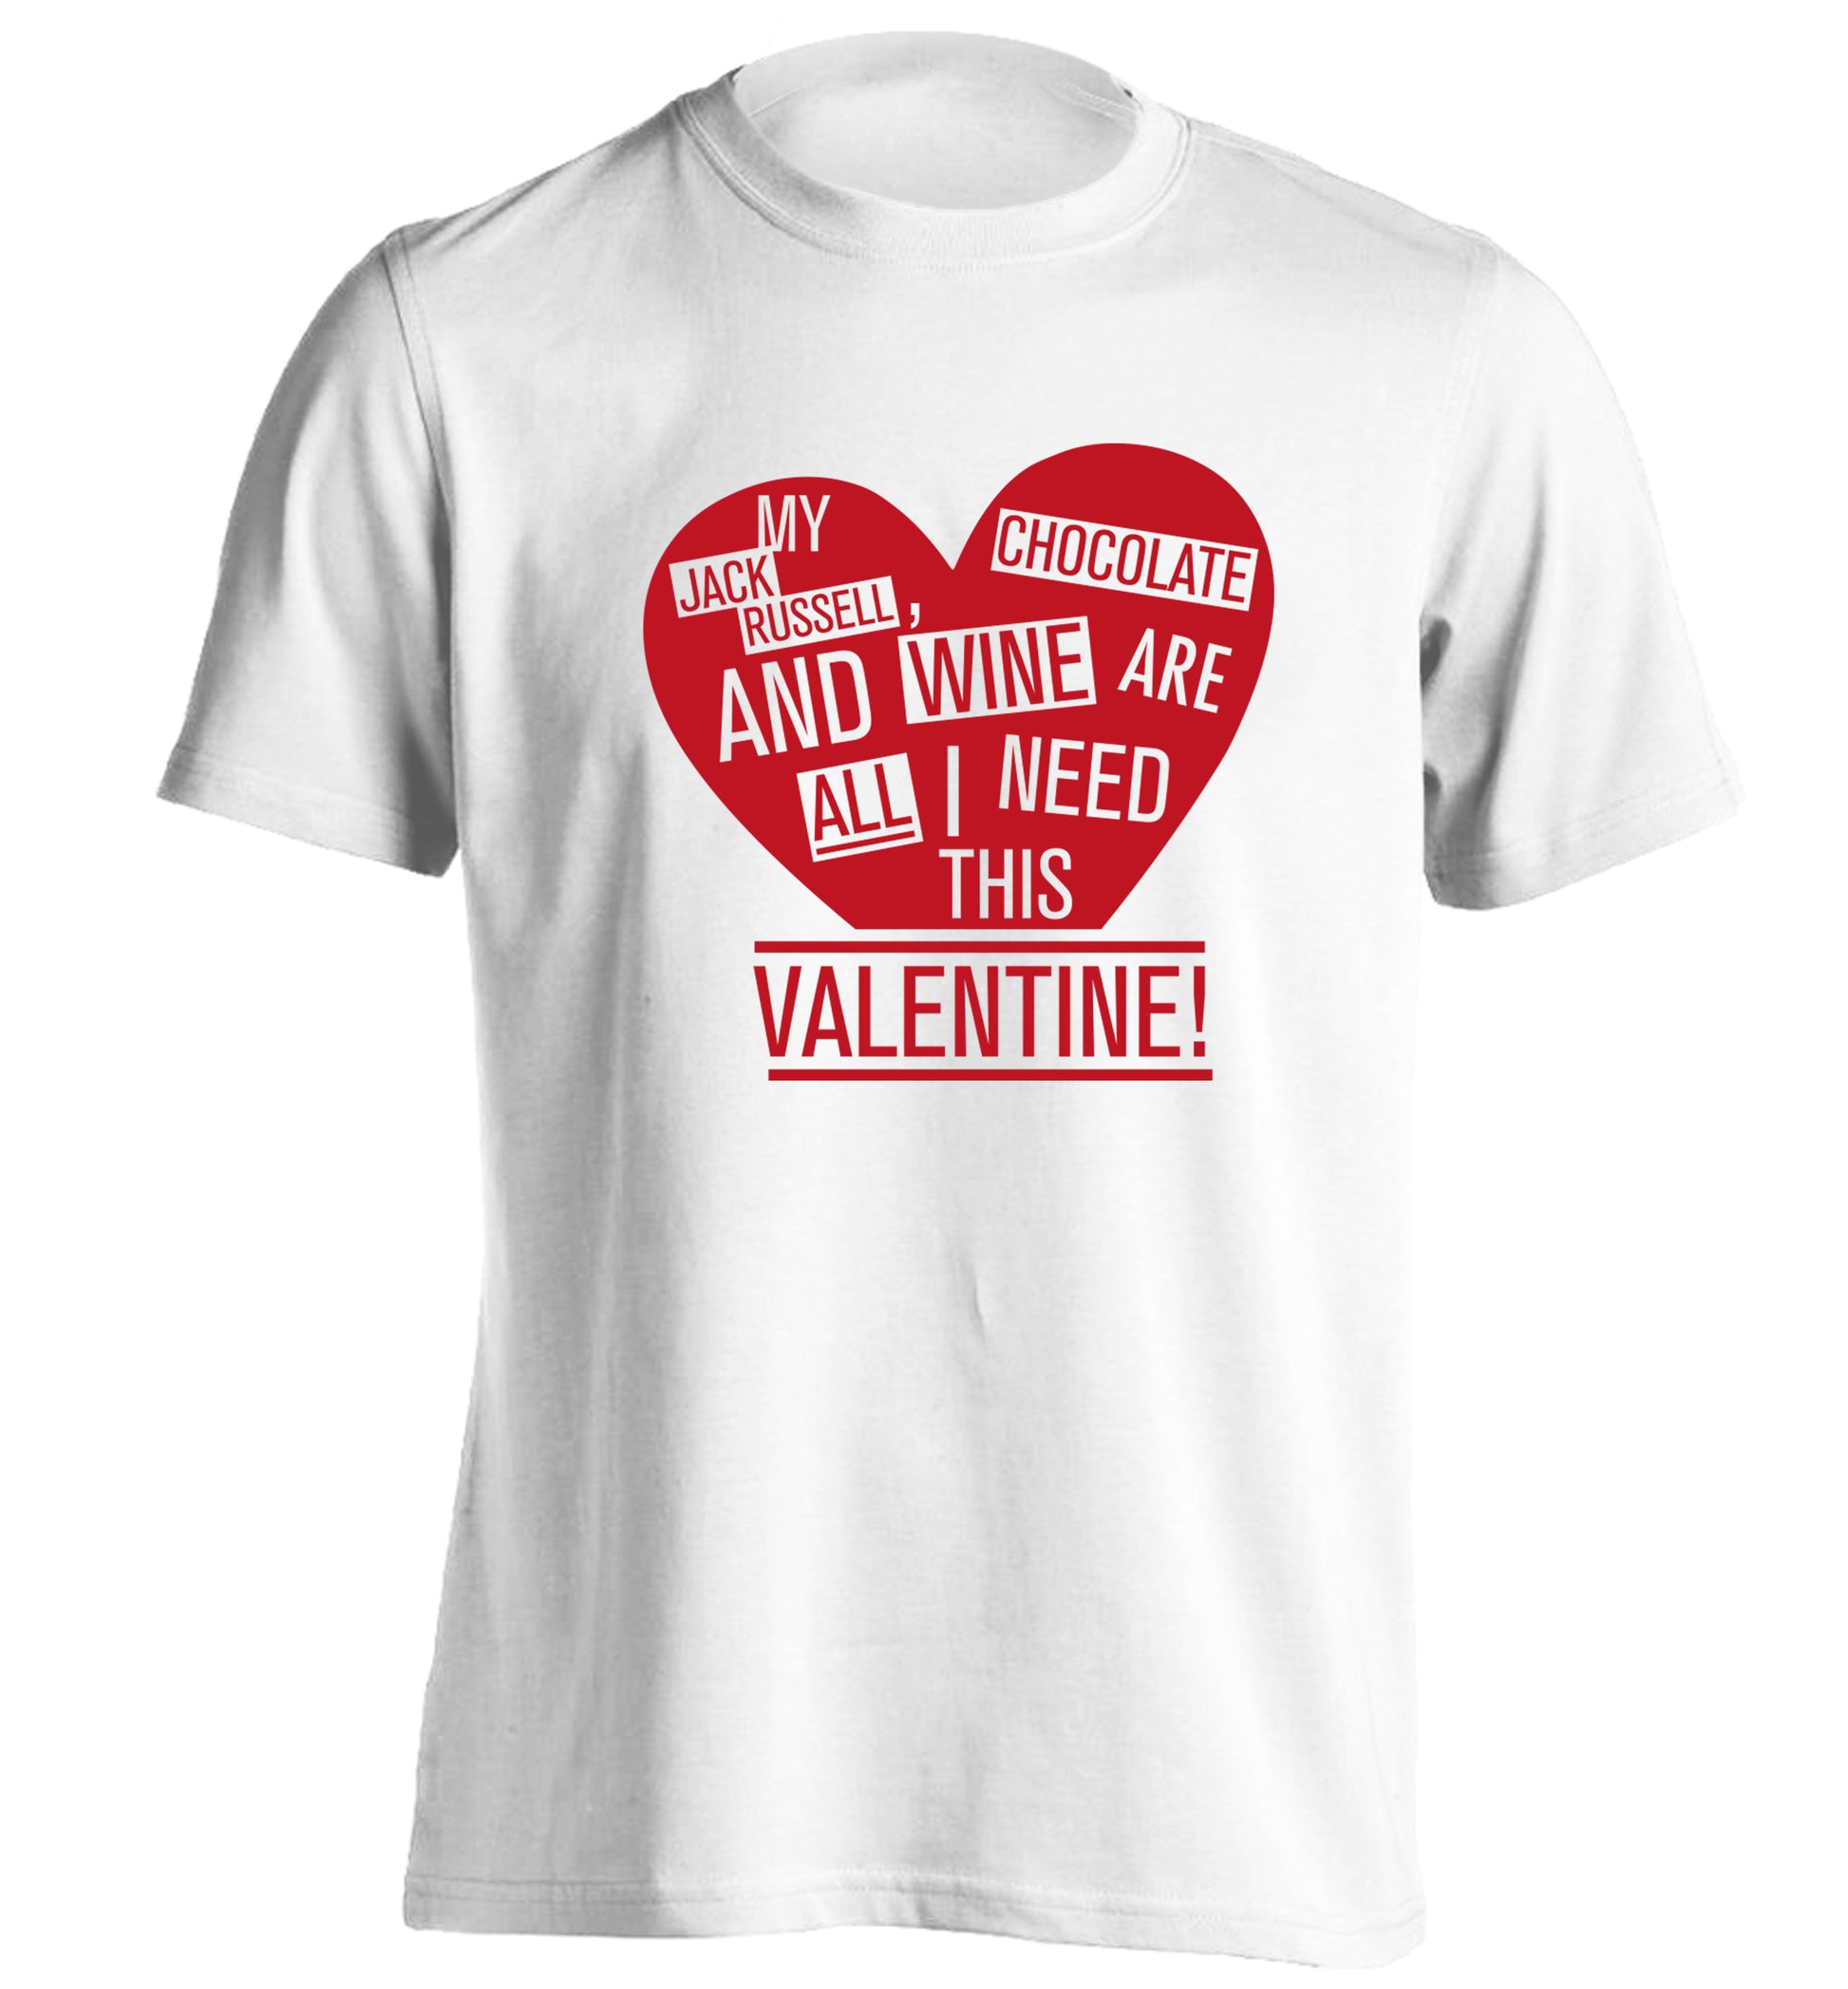 My jack russell, chocolate and wine are all I need this valentine! adults unisex white Tshirt 2XL